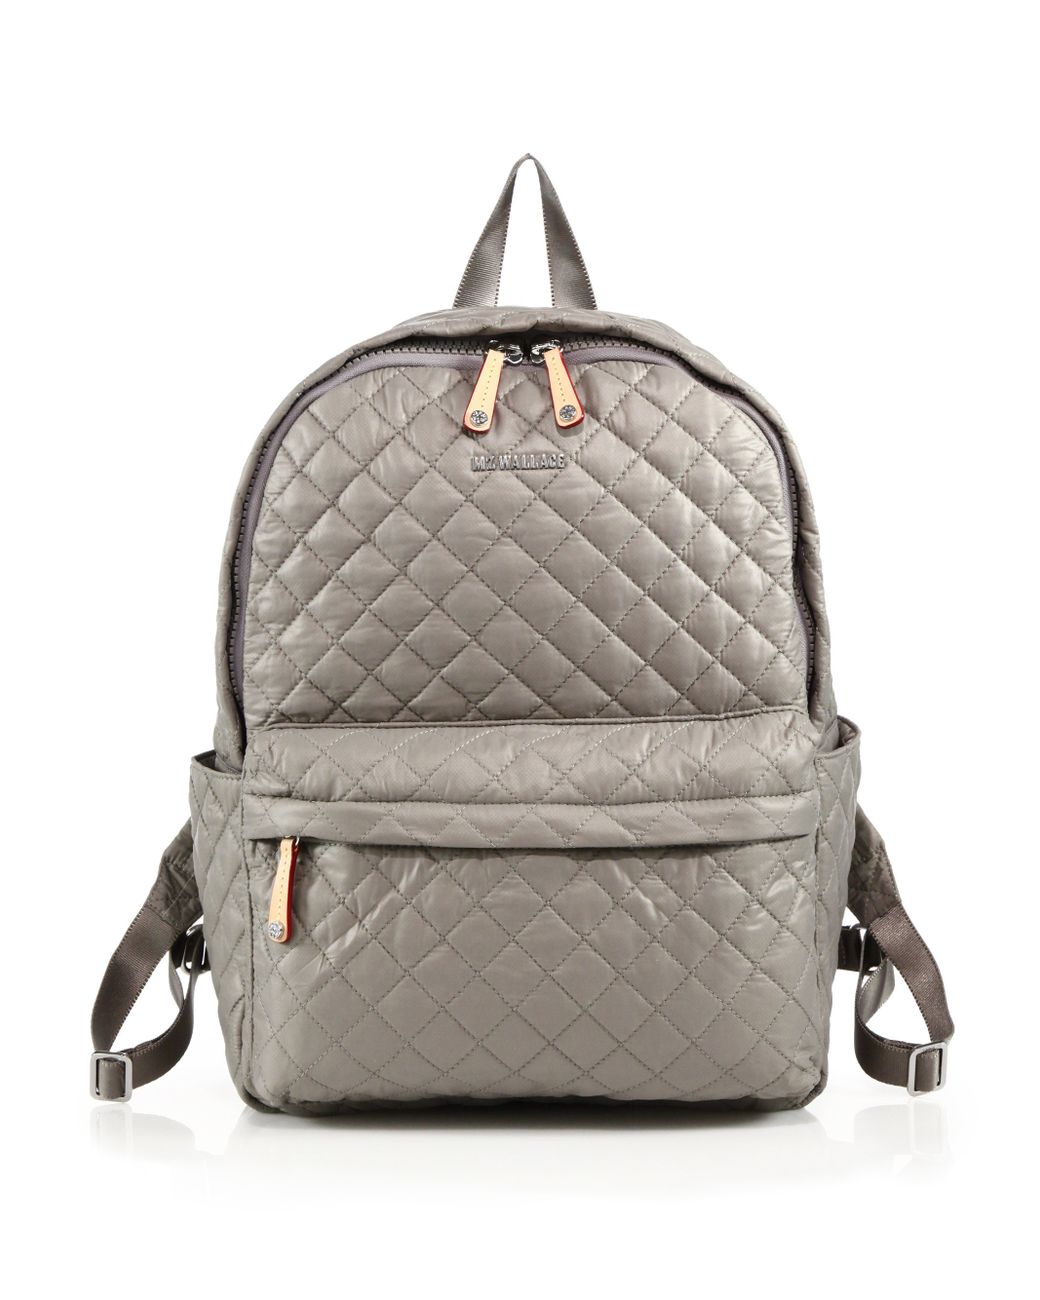 MZ Wallace REC METRO CITY GRAY QUILTED SOFT NYLON BACKPACK - $71 - From lulu